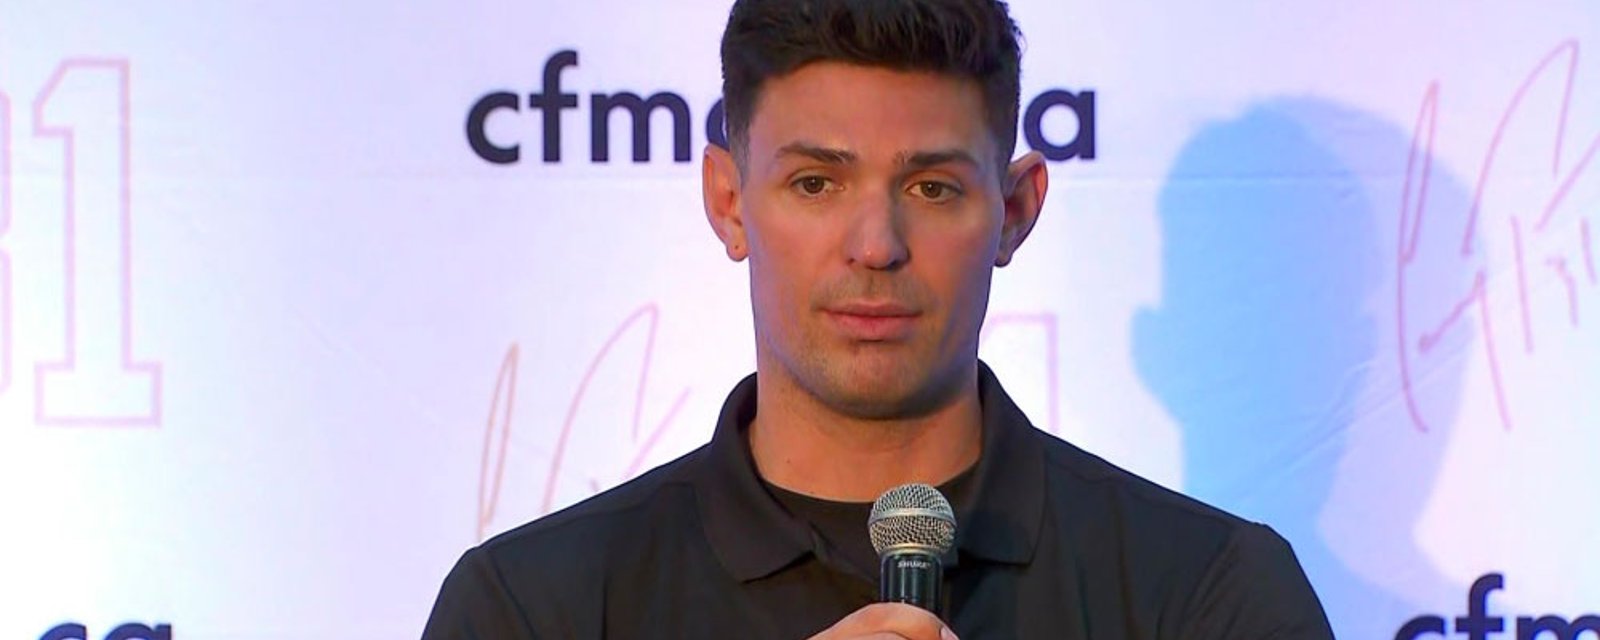 Carey Price breaks the hearts of Habs fans this morning